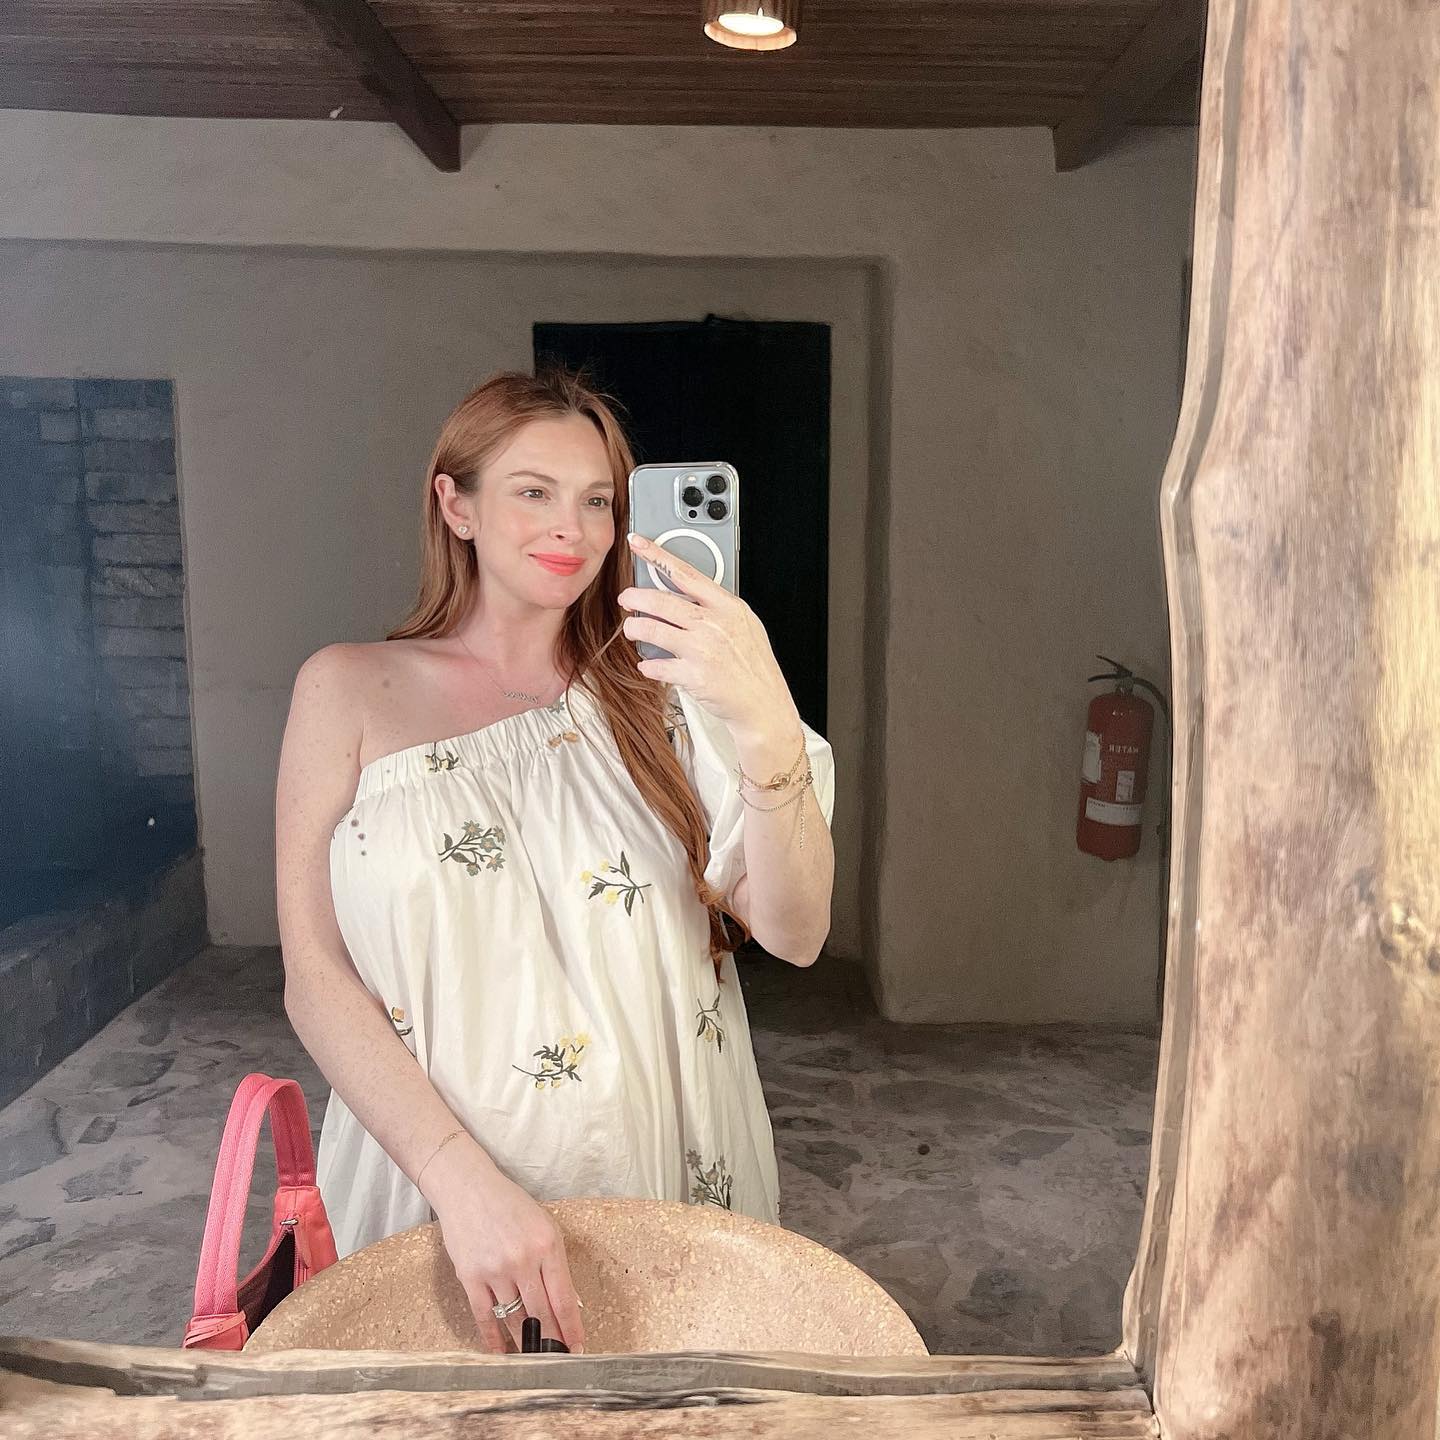 Lindsay Lohan continues to glow as she nears the end of her pregnancy